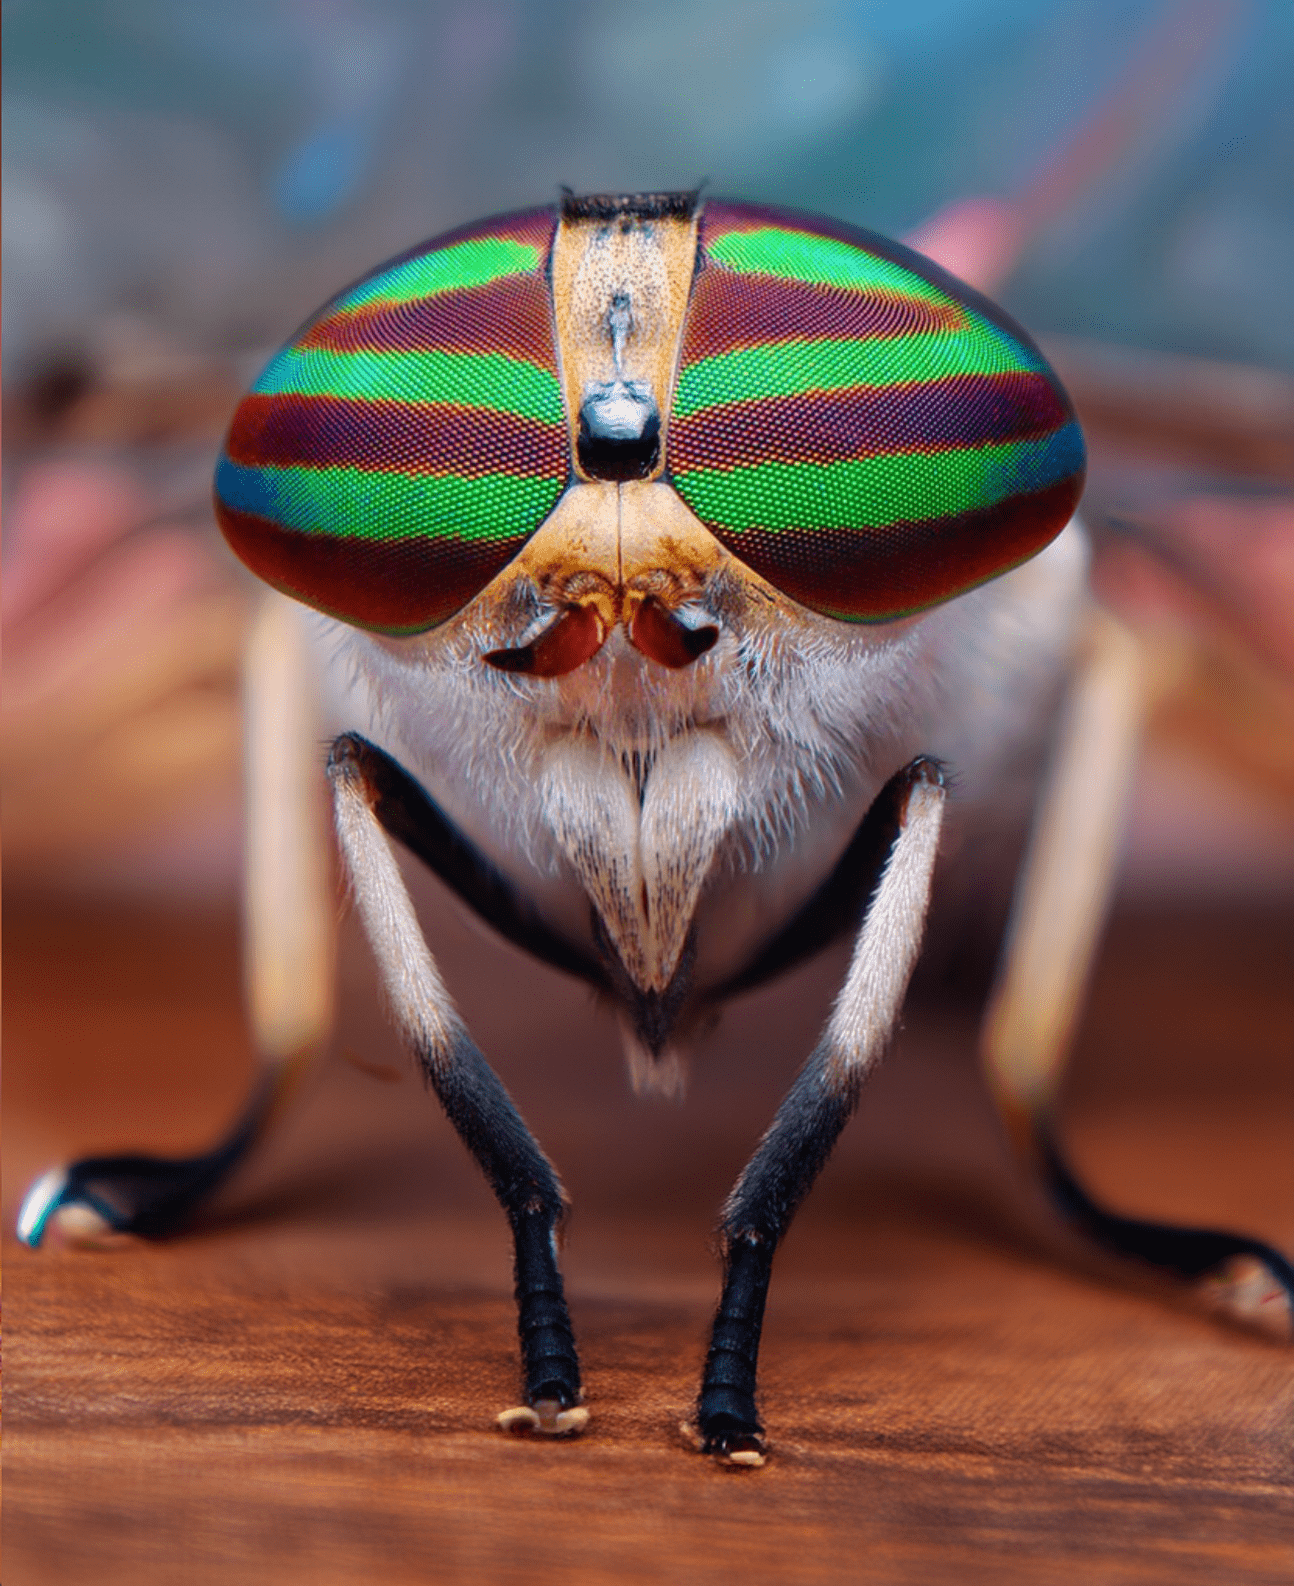 horsefly on table